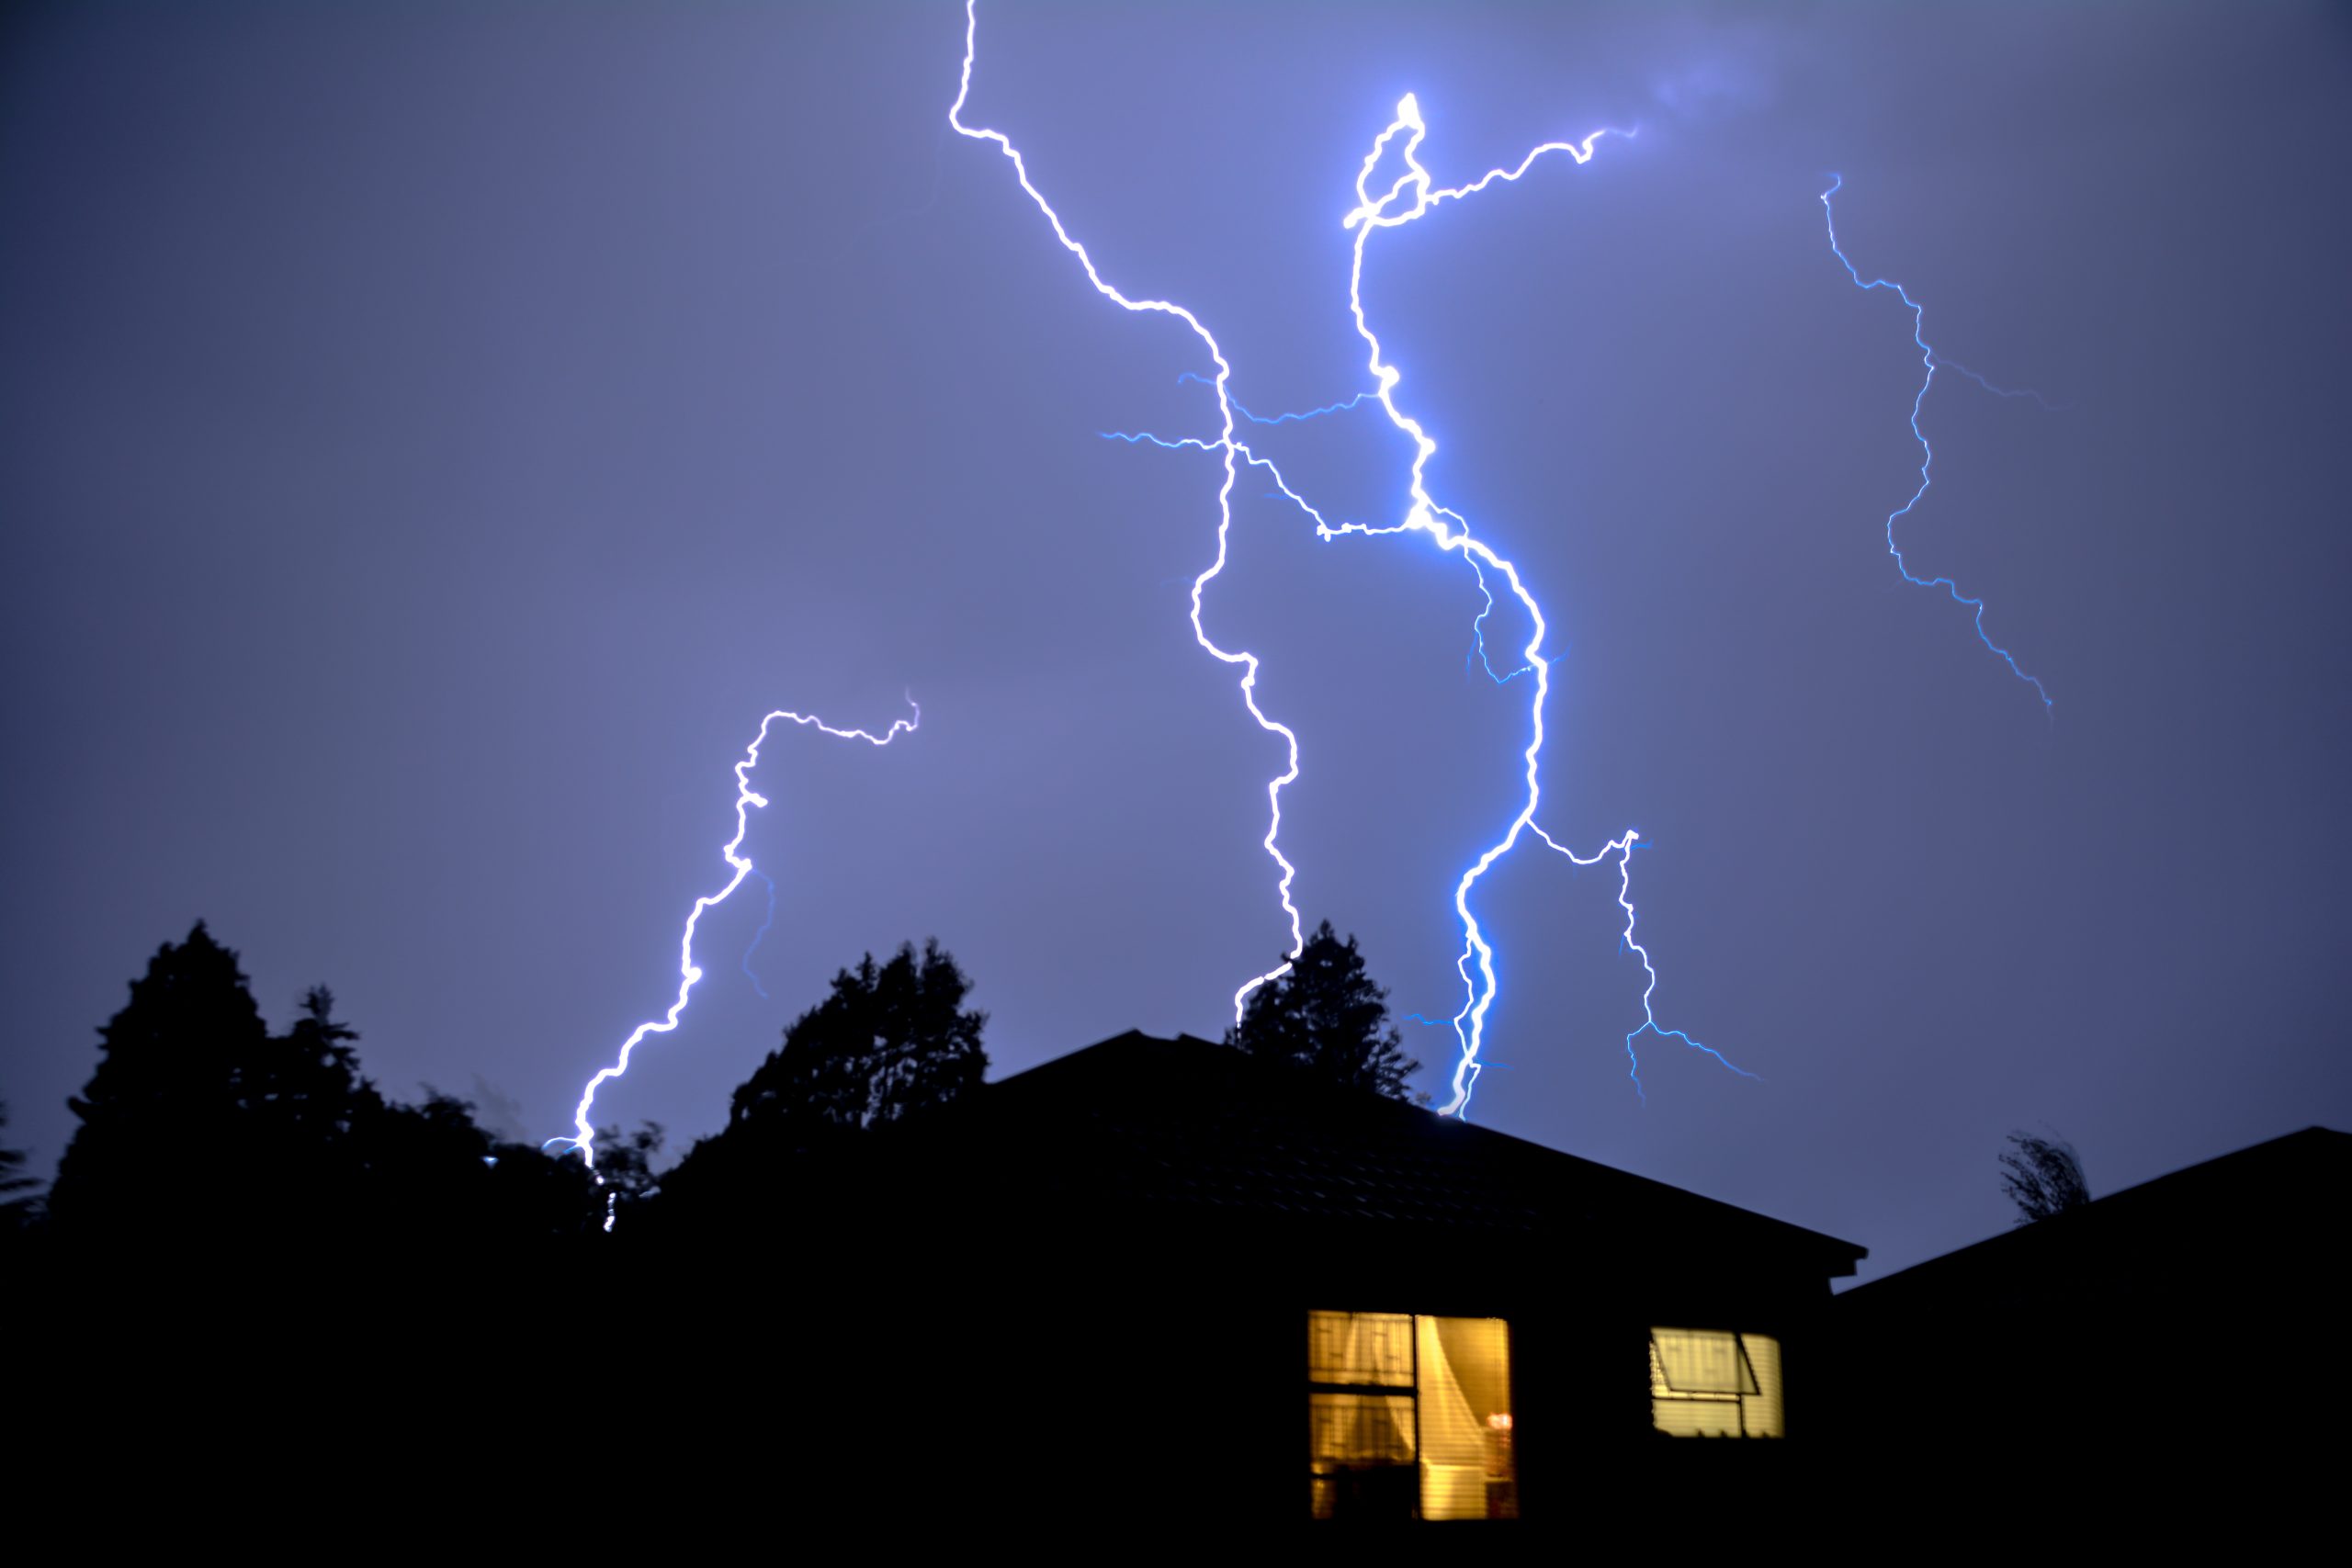 7 Safety Tips to Help Protect Your Home and Vehicle from an Approaching Storm